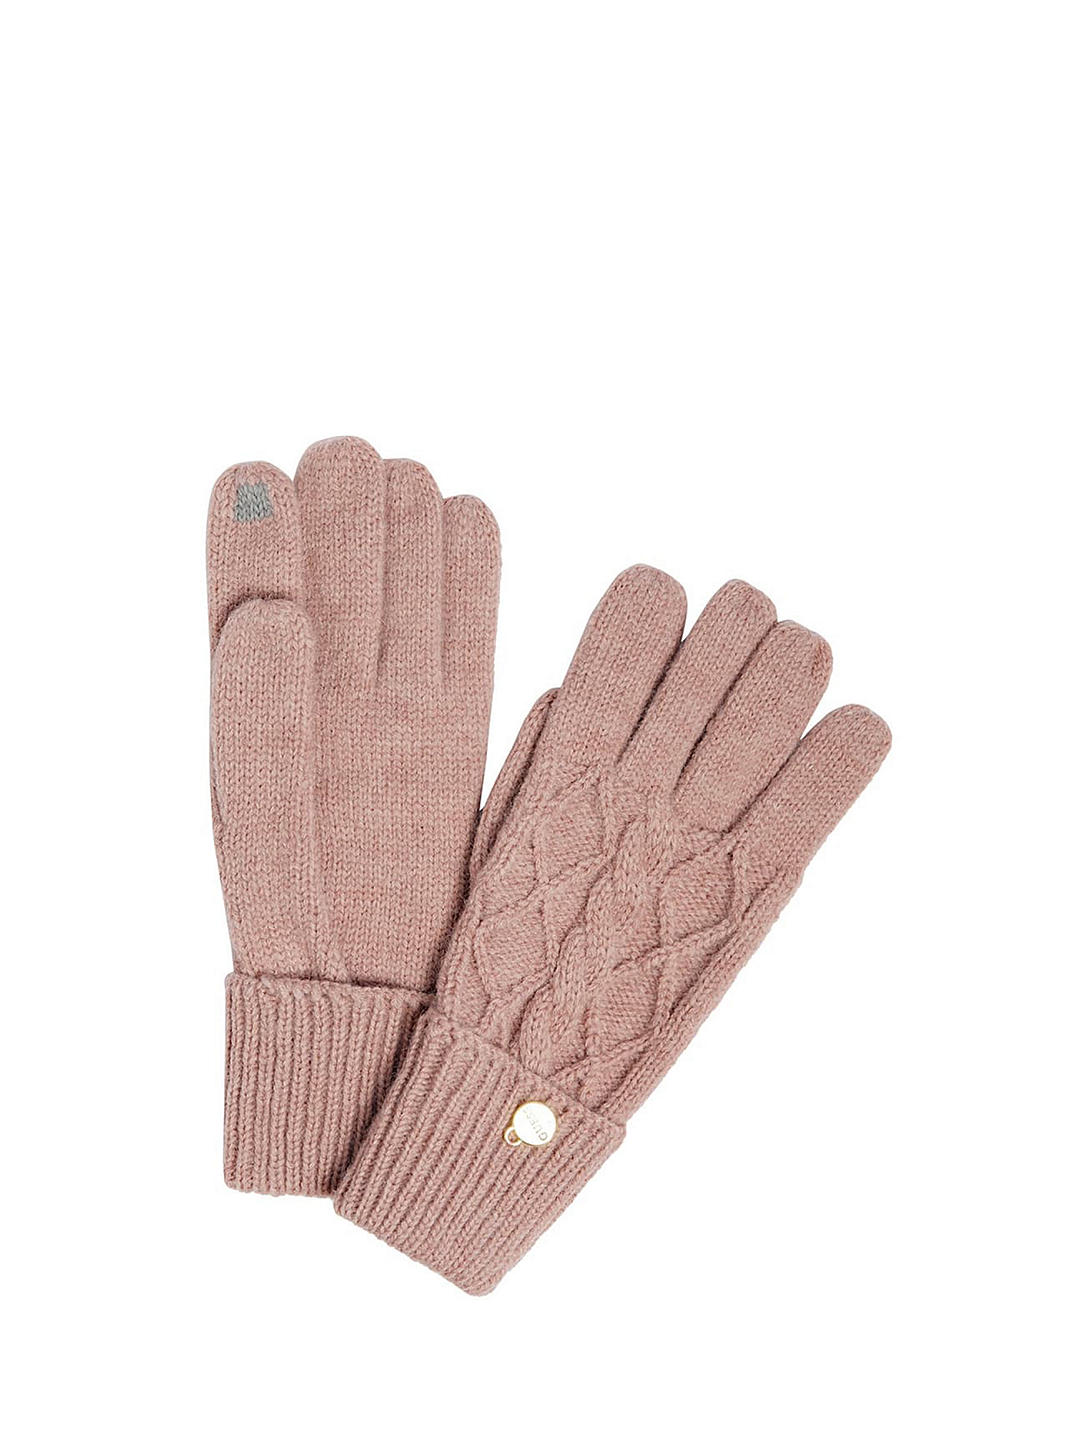 GUESS Cable Knit Gloves, Antique Rose